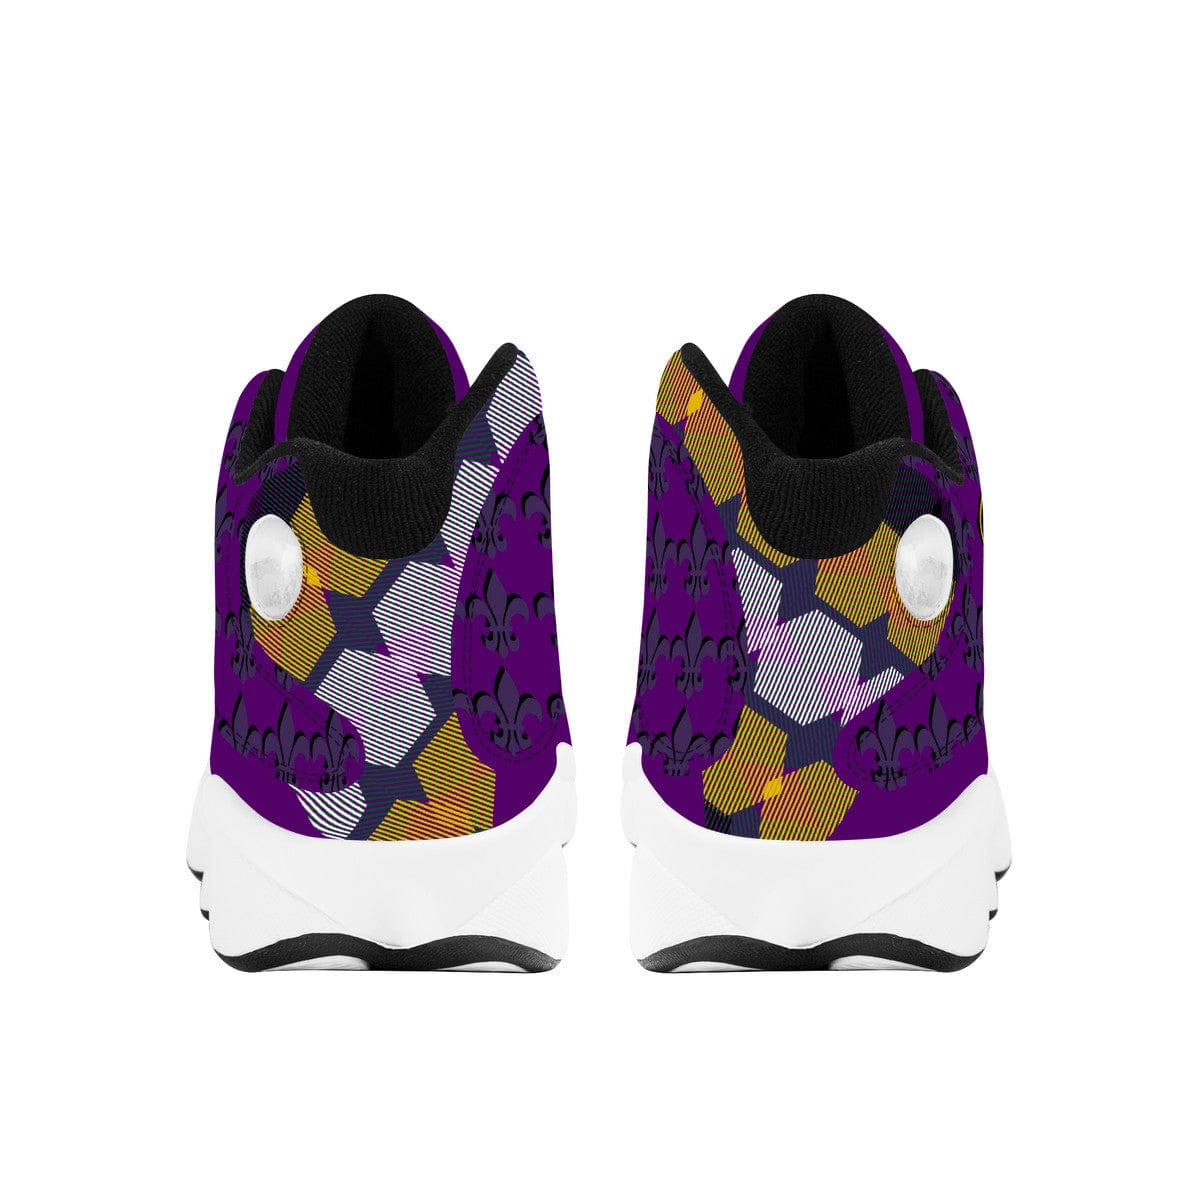 basketball shoes Phenomenal royalty violet shoes